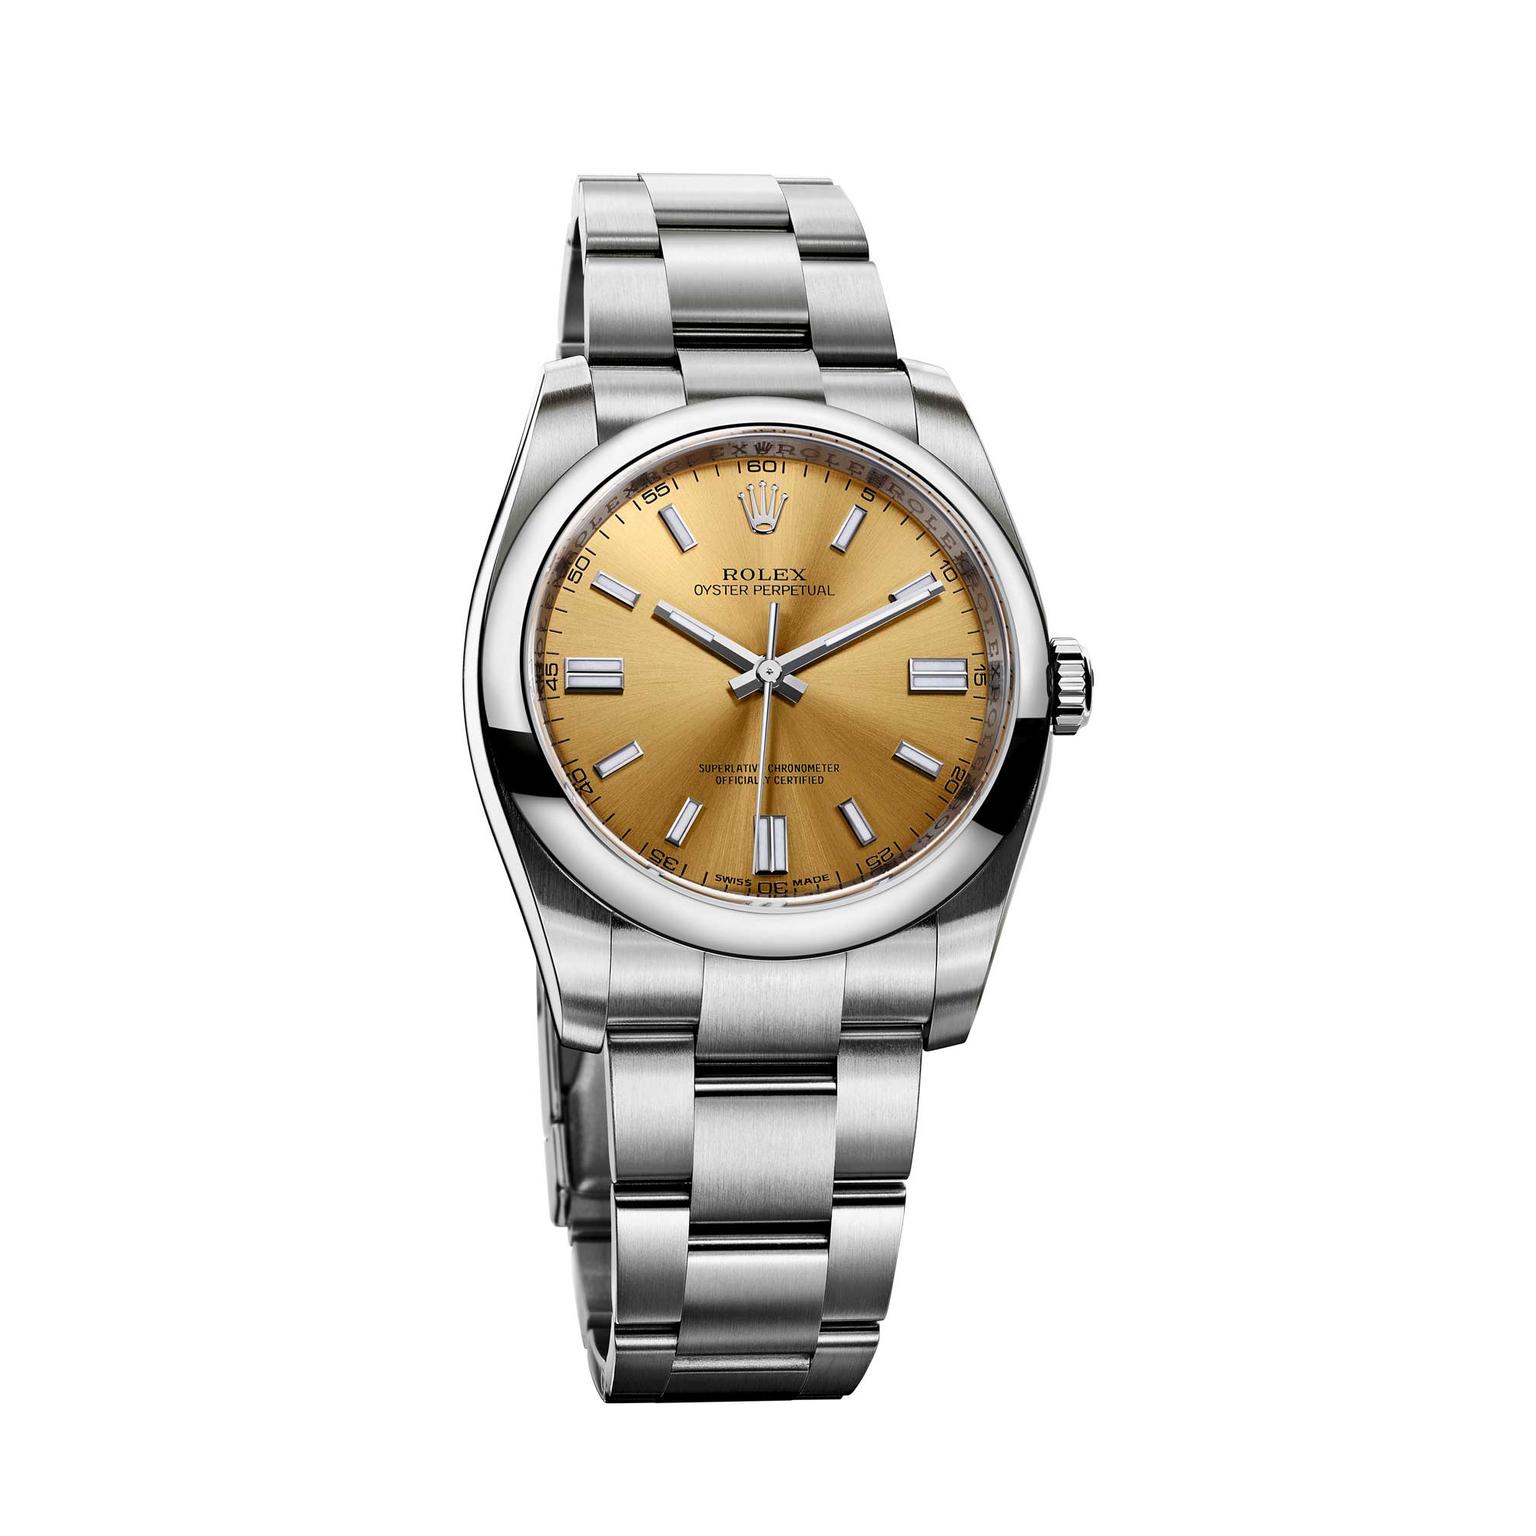 Rolex Oyster Perpetual white grape watch